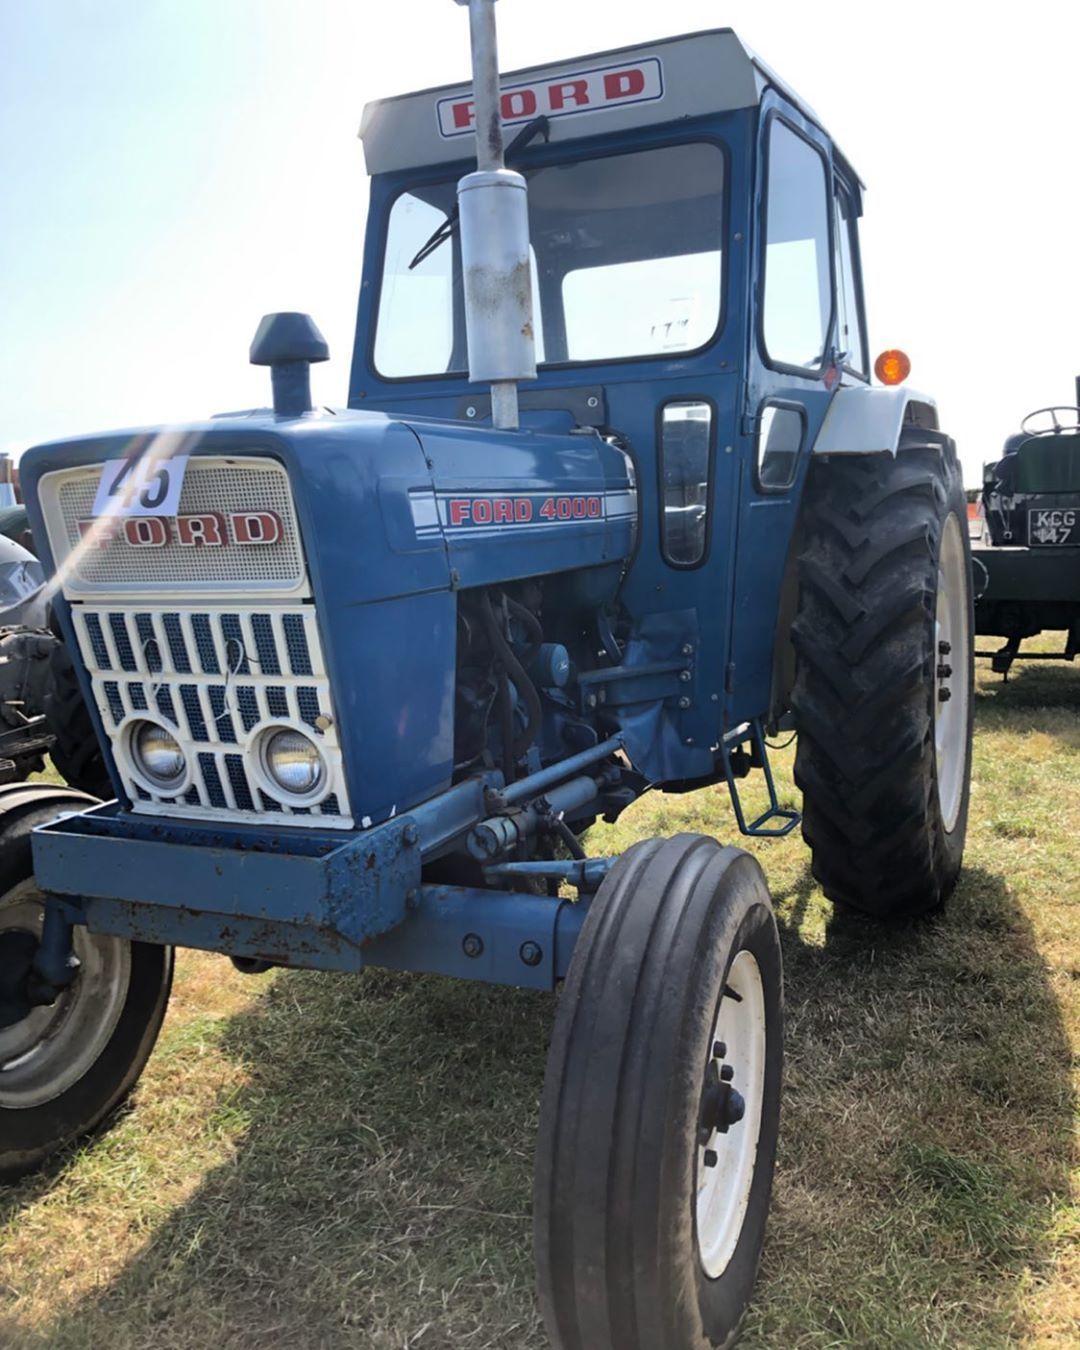 Wish my 4000 was this tidy. Classic tractors at St Buryan. #ford